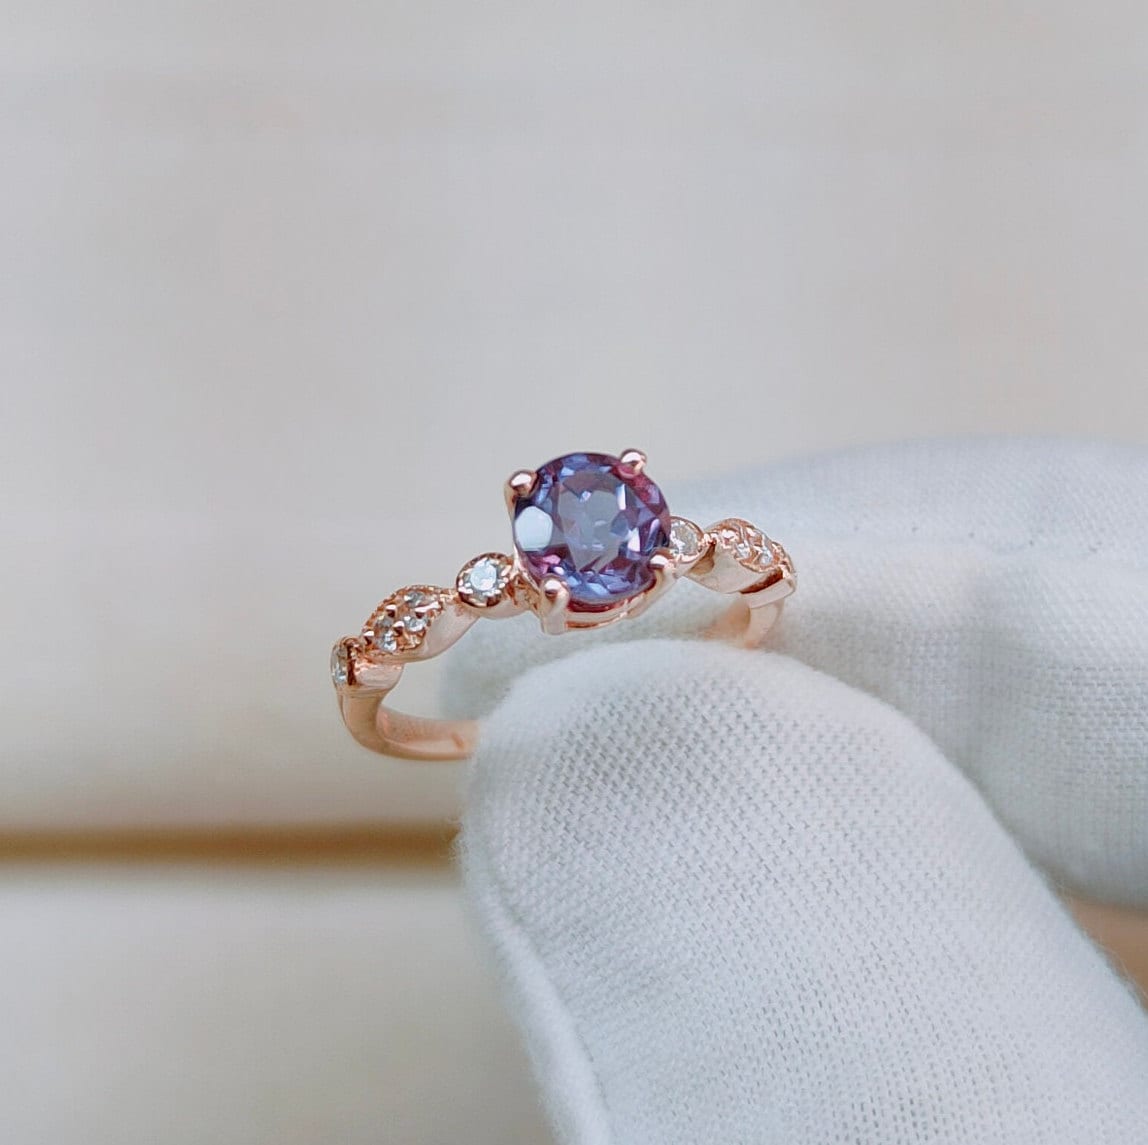 lab created alexandrite ring Color Change Stone Ring 925 Sterling Silver Ring Ring for Gift Alexandrite Ring Oval Cut Alexandrite